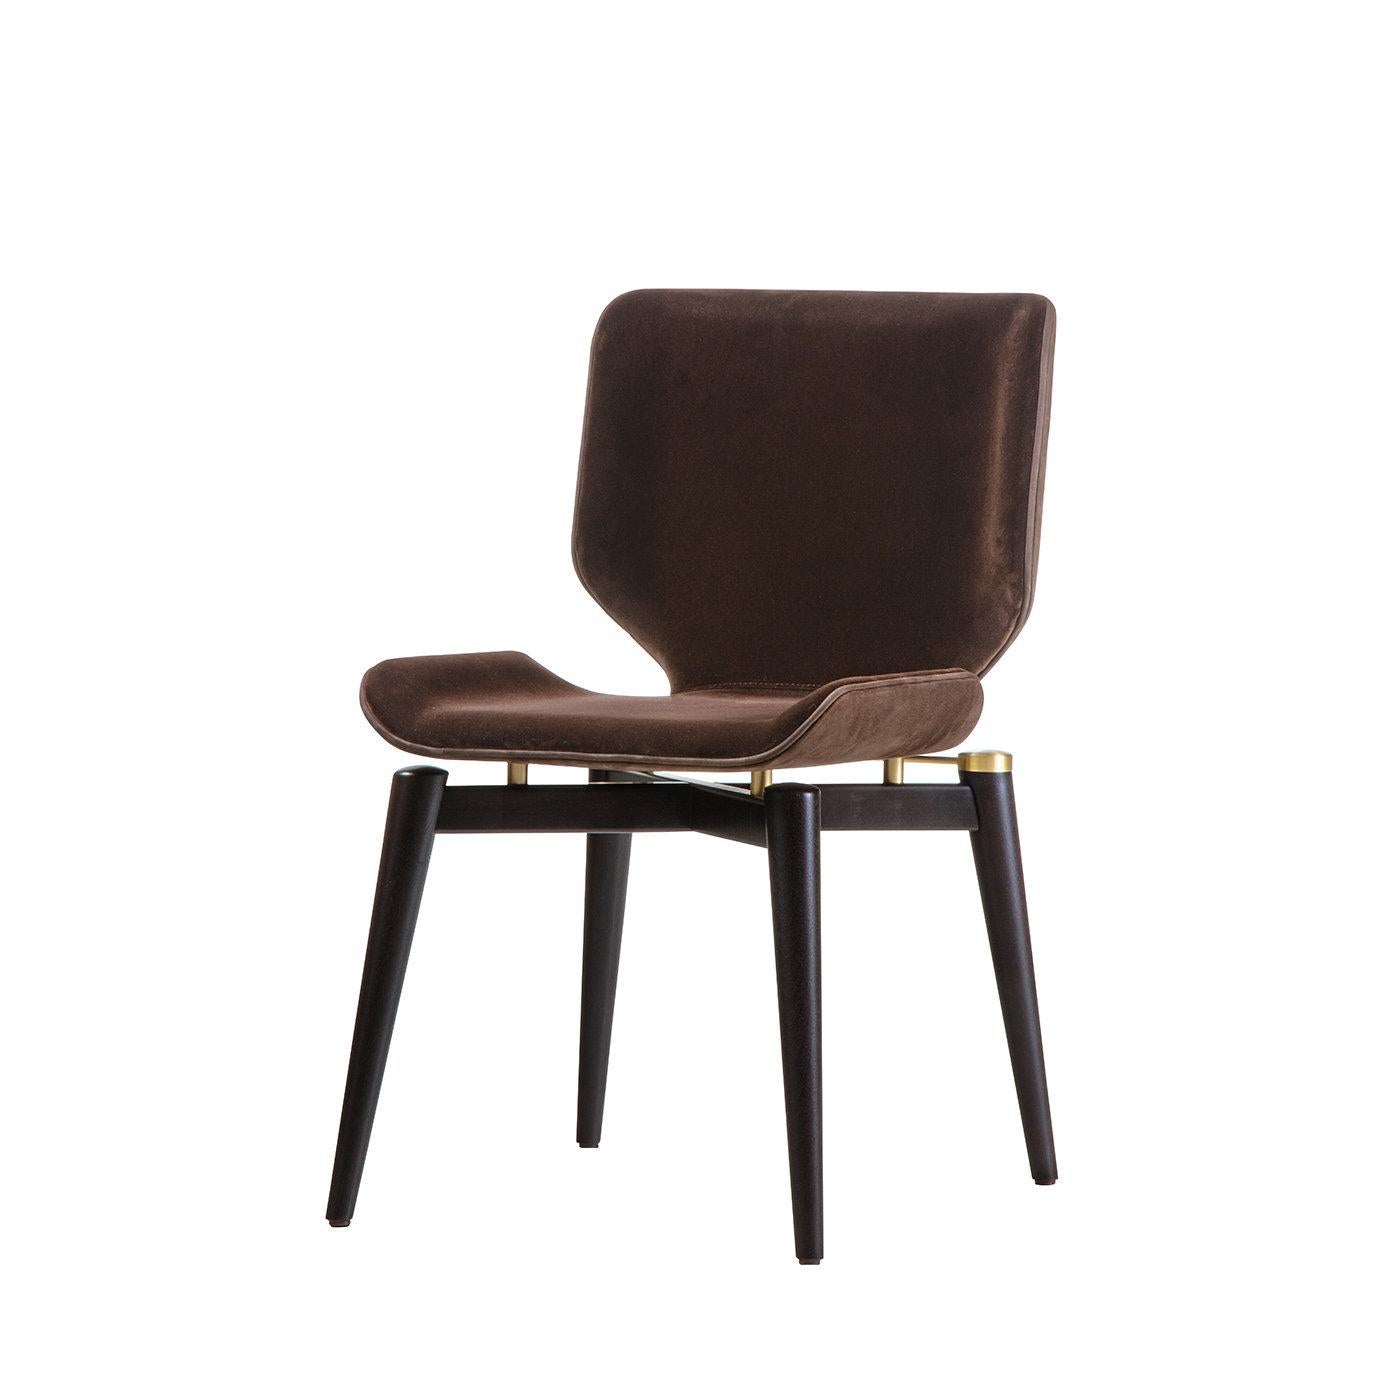 This exquisite chair couples sartorial details with a sleek shape, bringing subdued class to any setting. Also available in a variant with a lower backrest and with a stool counterpart, it features a solid walnut structure finished in glossy